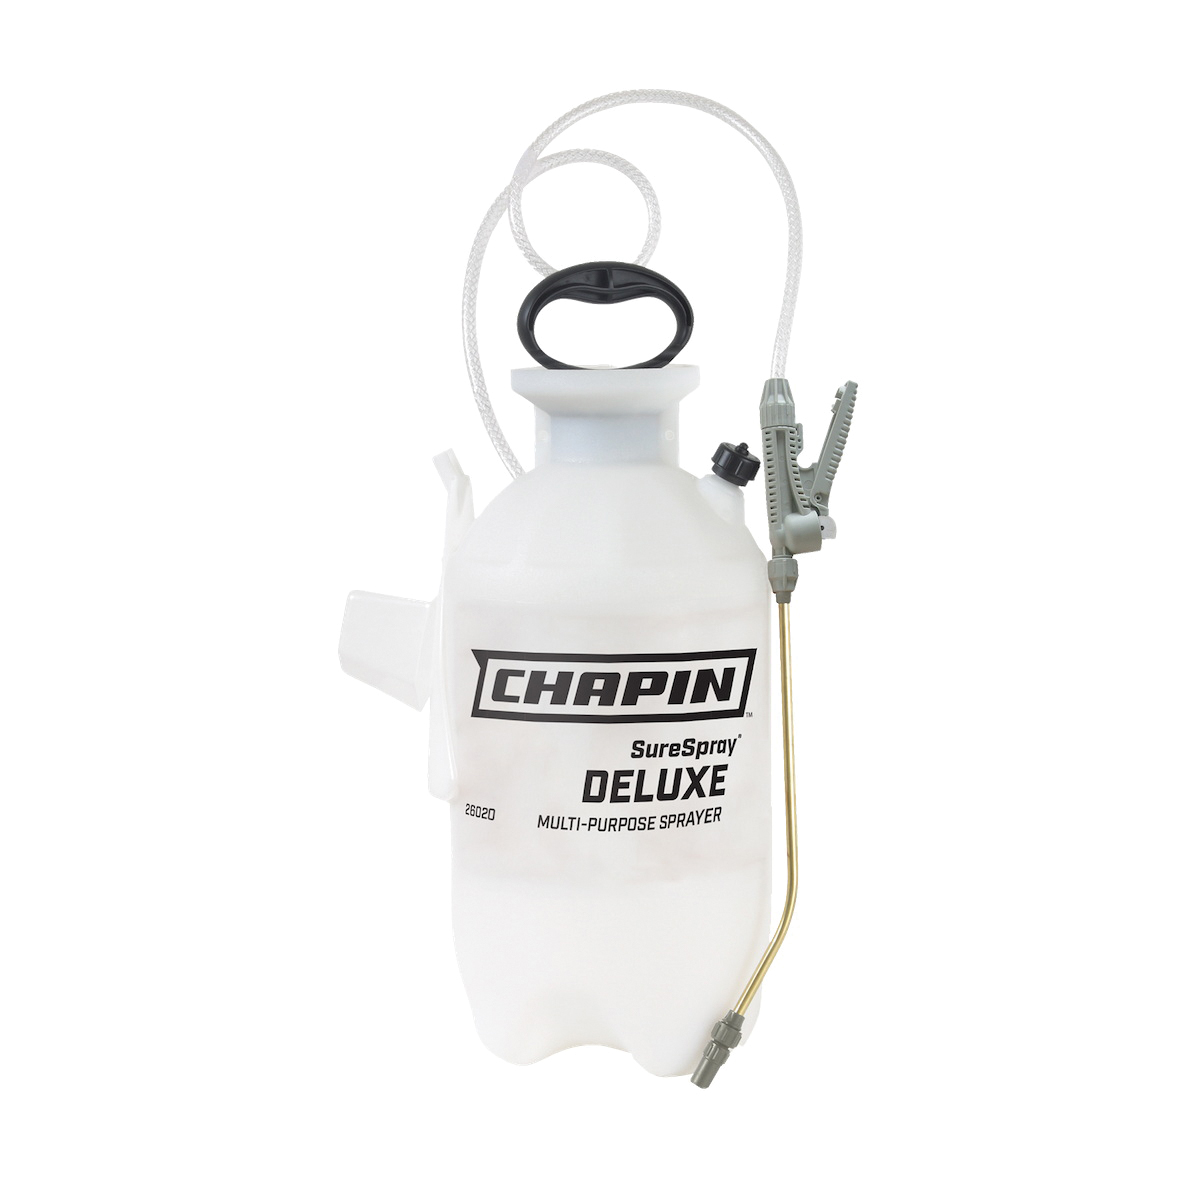 CHAPIN SureSpray 26020 Compression Sprayer, 2 gal Tank, Poly Tank, 34 in L Hose